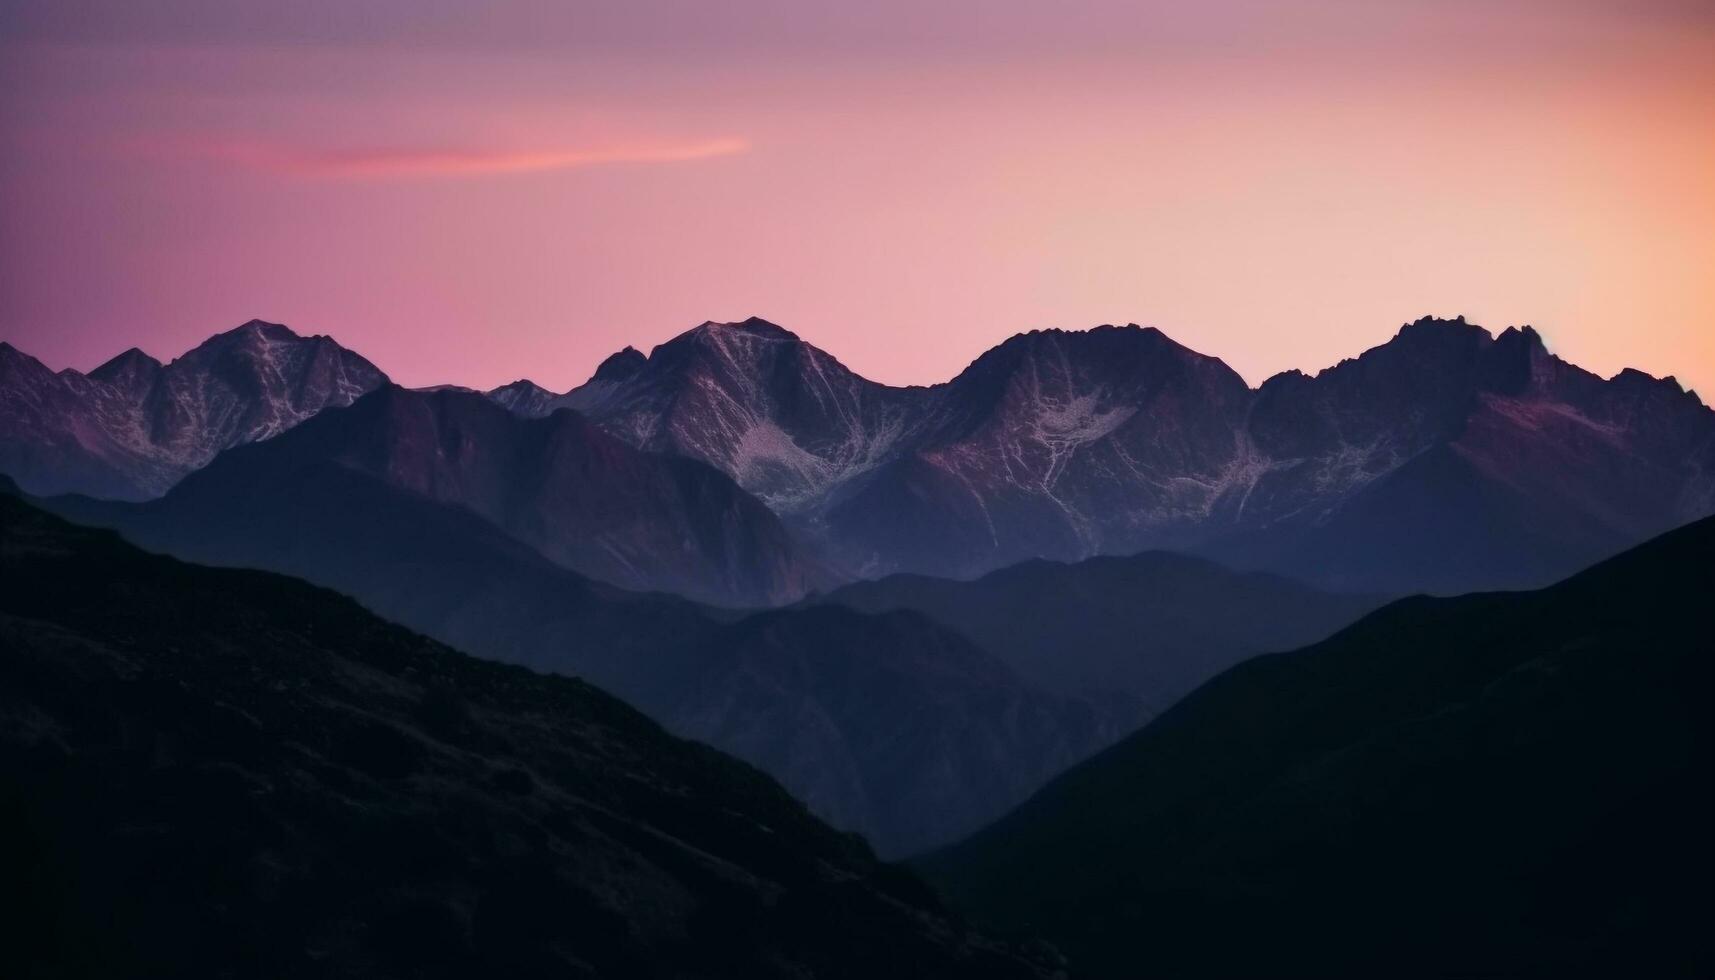 Majestic mountain range at dusk, a tranquil scene of beauty generated by AI photo